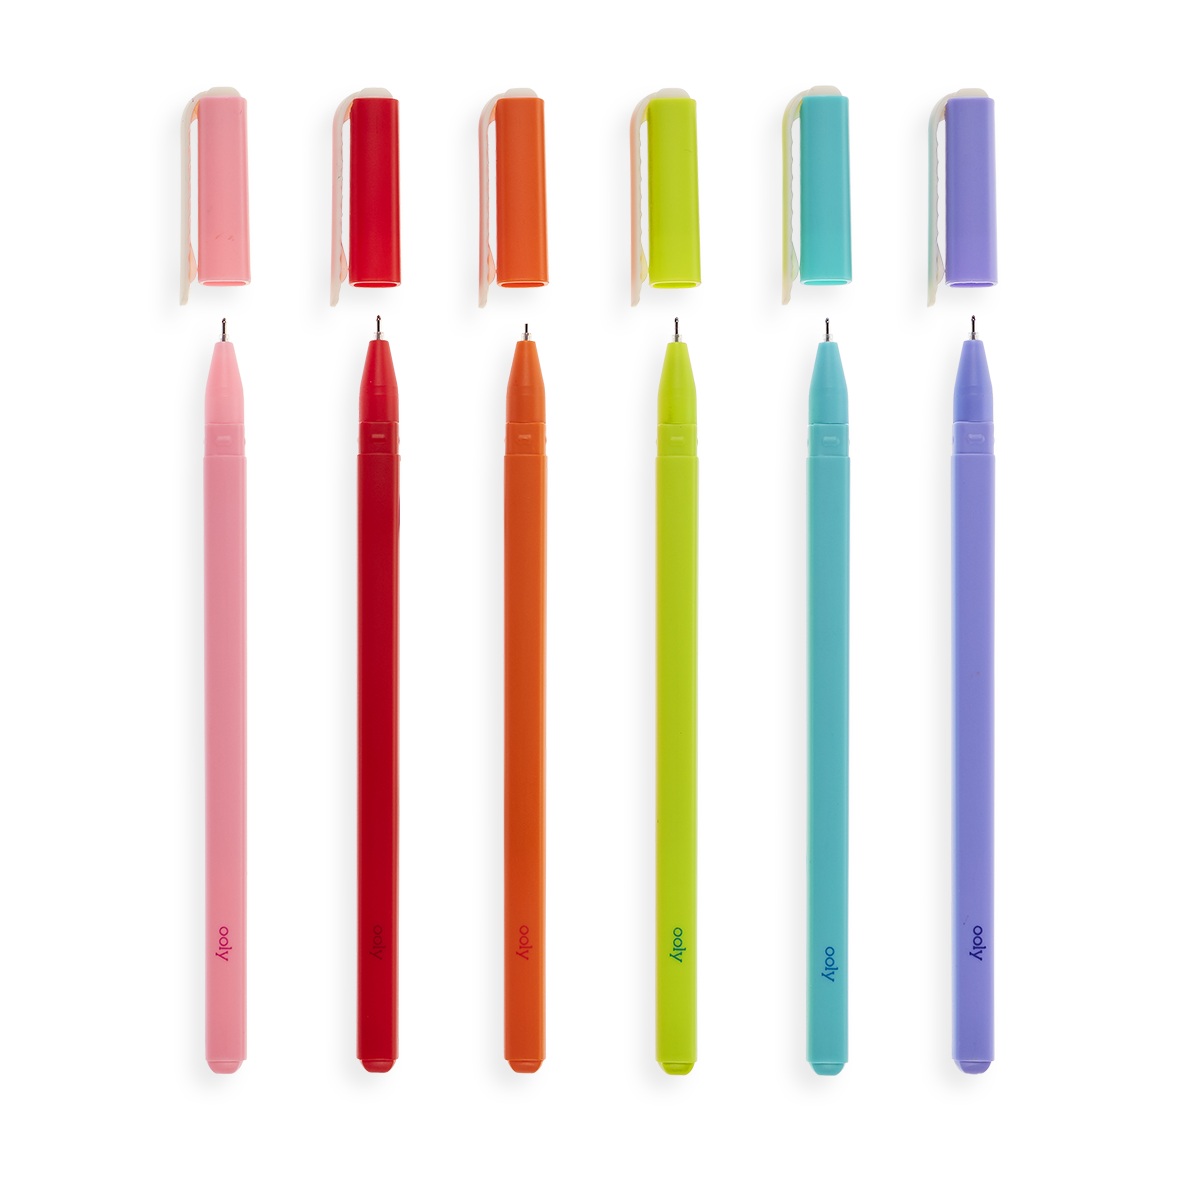 Fine Line Colored Gel Pen - Set of 6 by OOLY